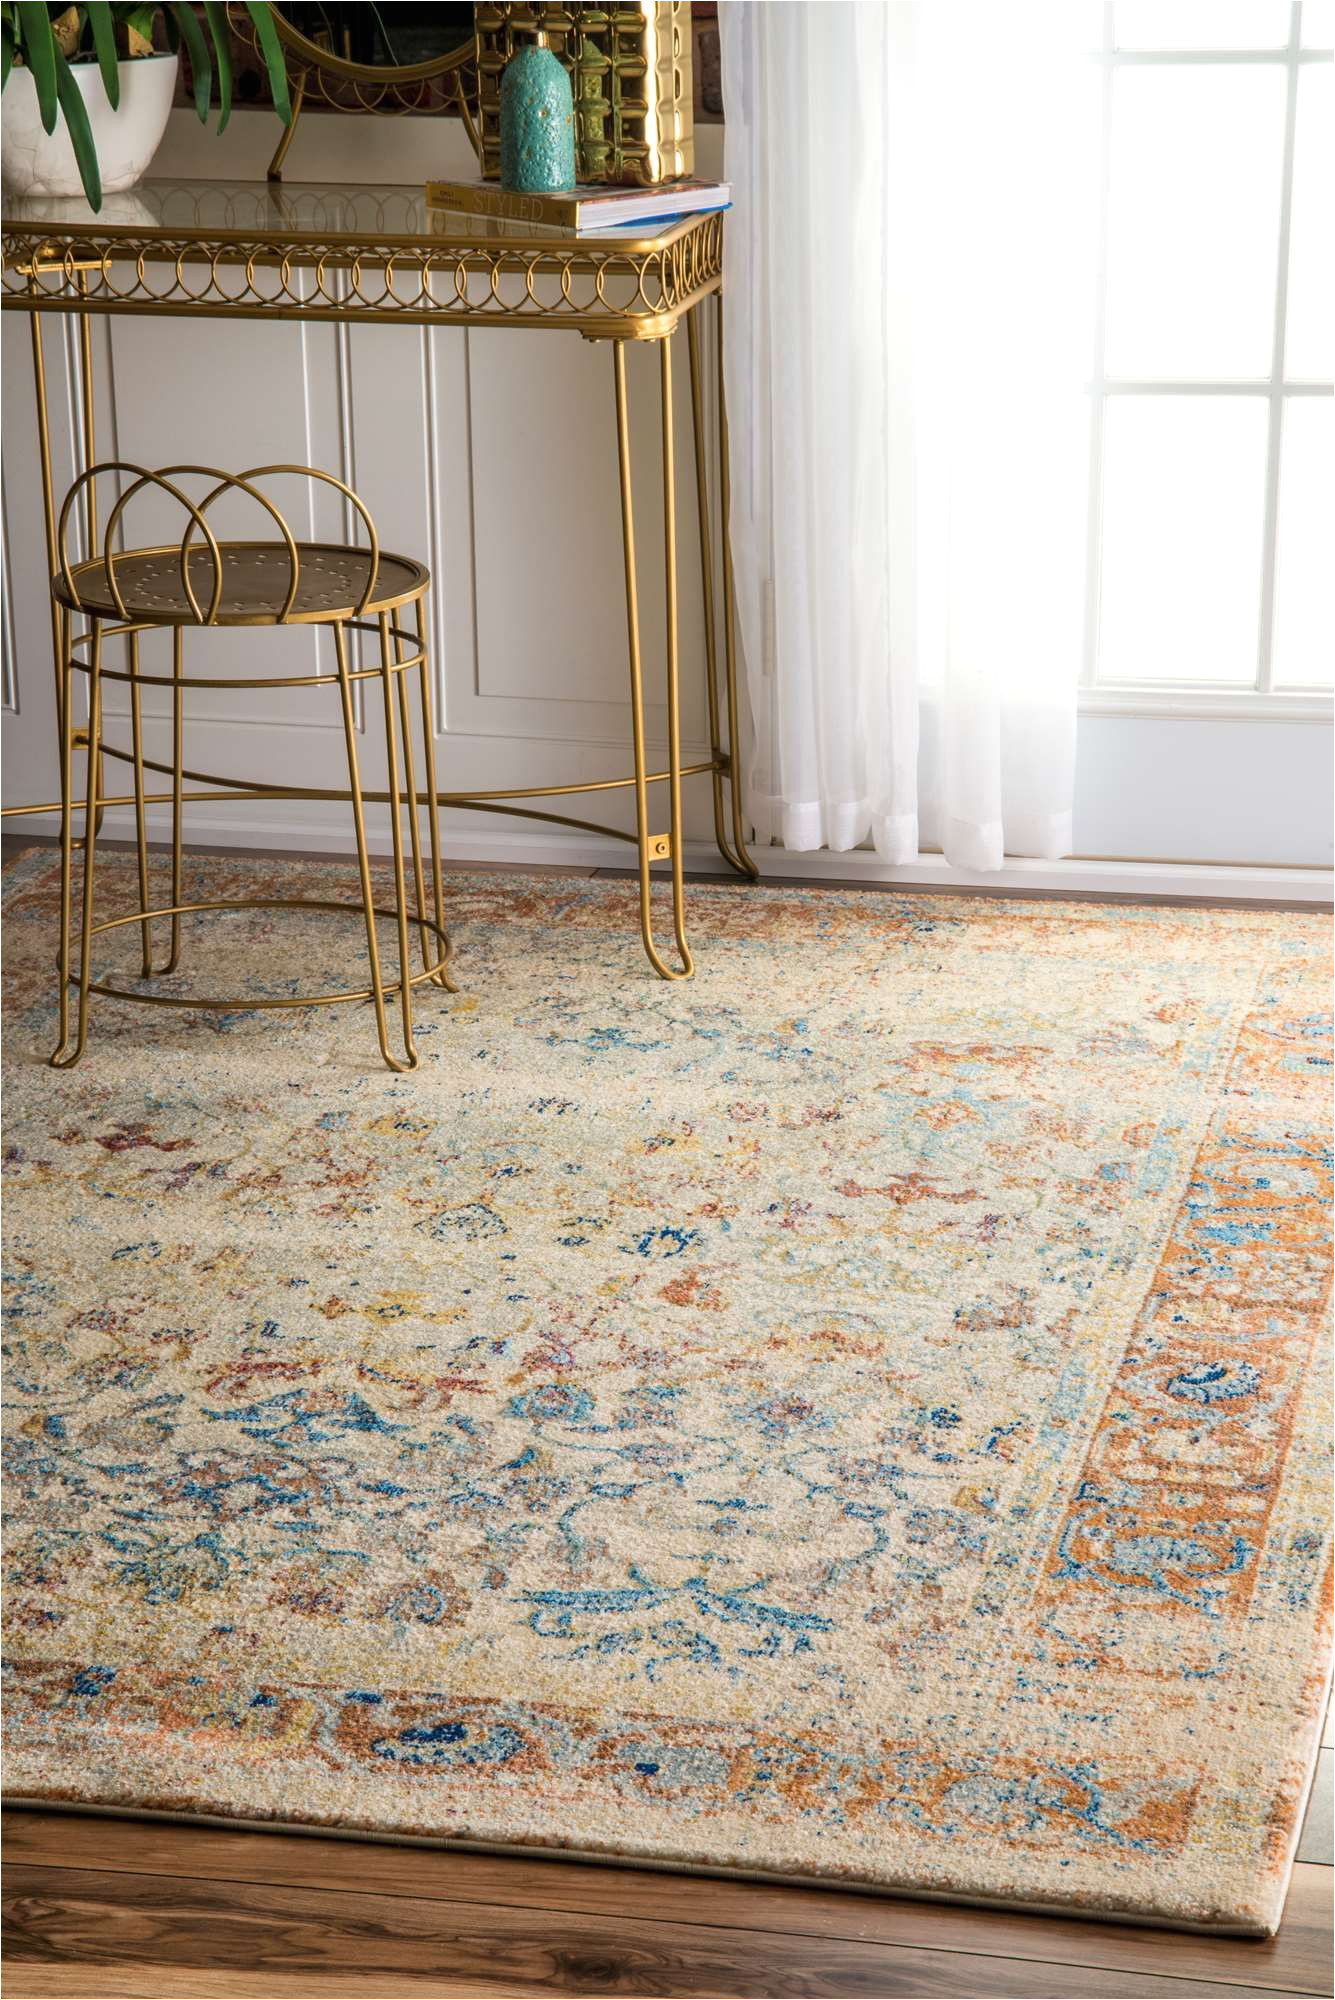 rugs usa area rugs in many styles including contemporary braided outdoor and flokati shag rugs buy rugs at america s home decorating superstorearea rugs